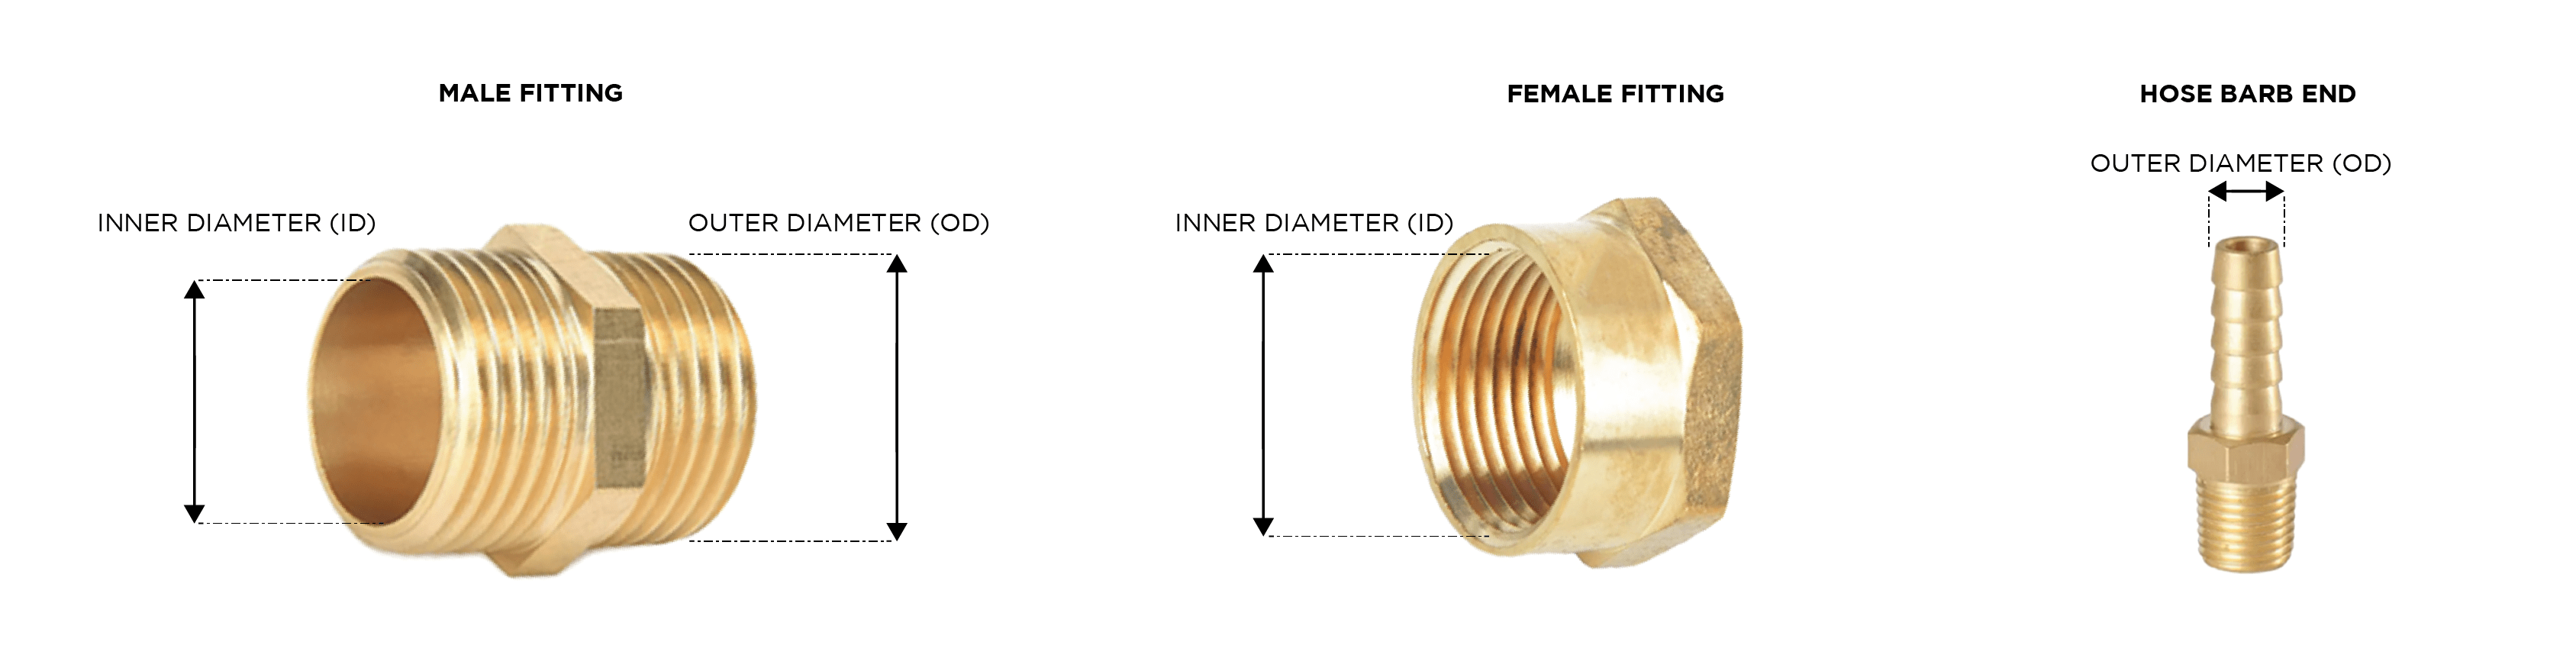 Compression Fittings,Manipulative Compression Fittings,Brass